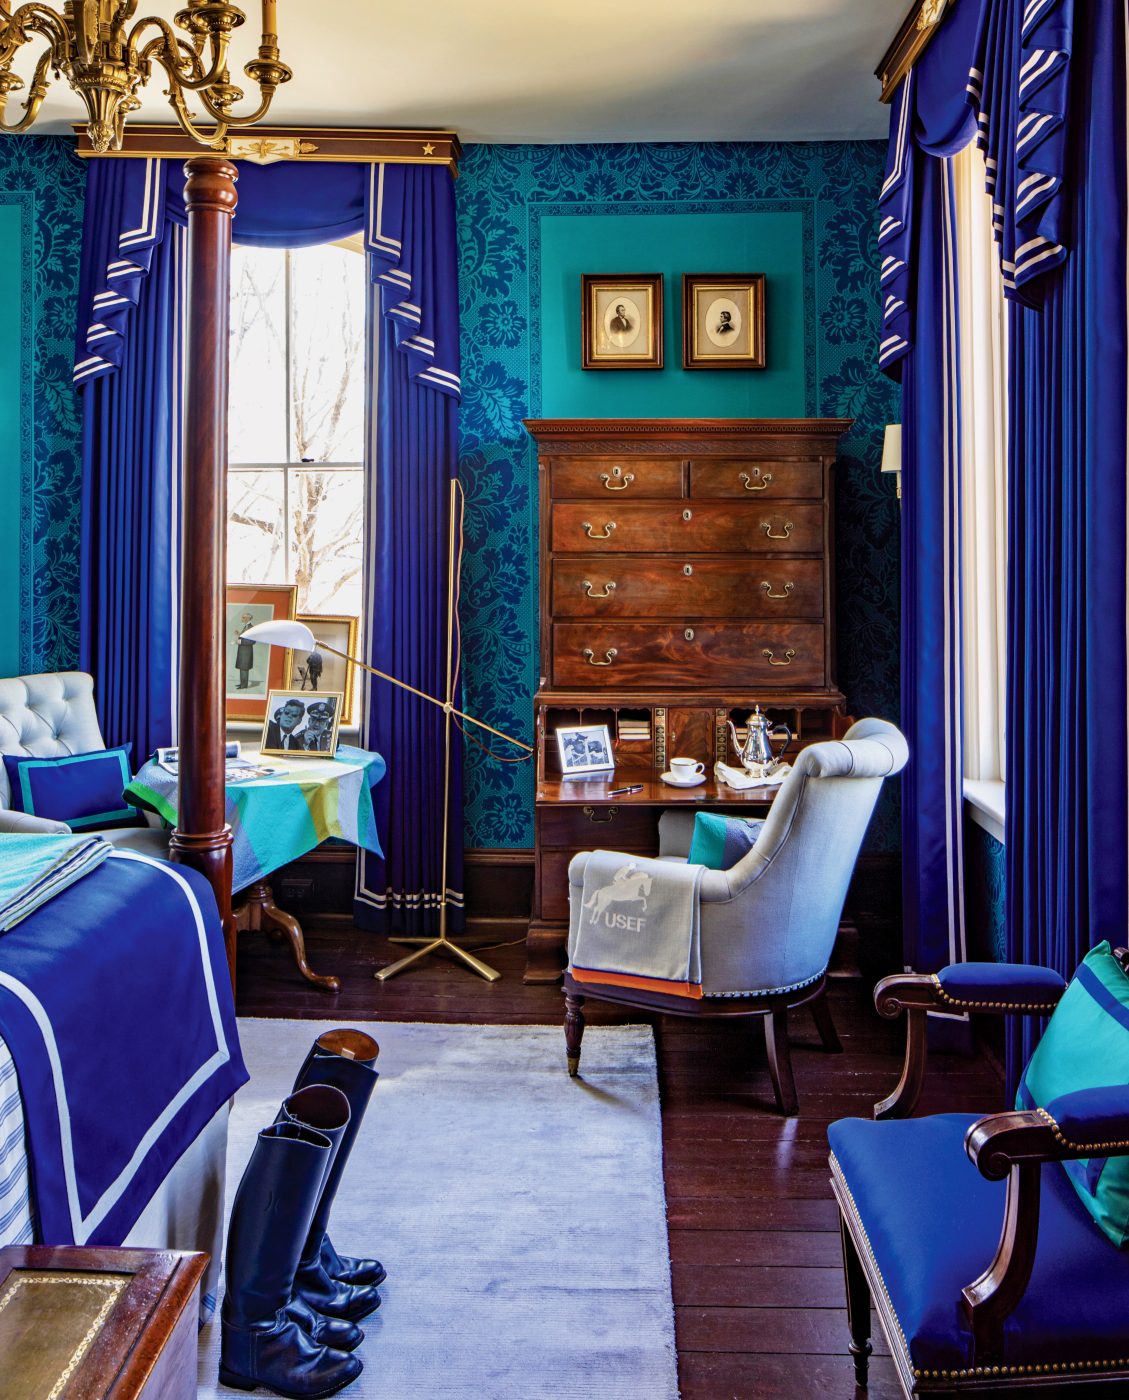 A blue bedroom at the Henry Blosser House, in Malta Bend, Missouri, designed by Kelee Katillac